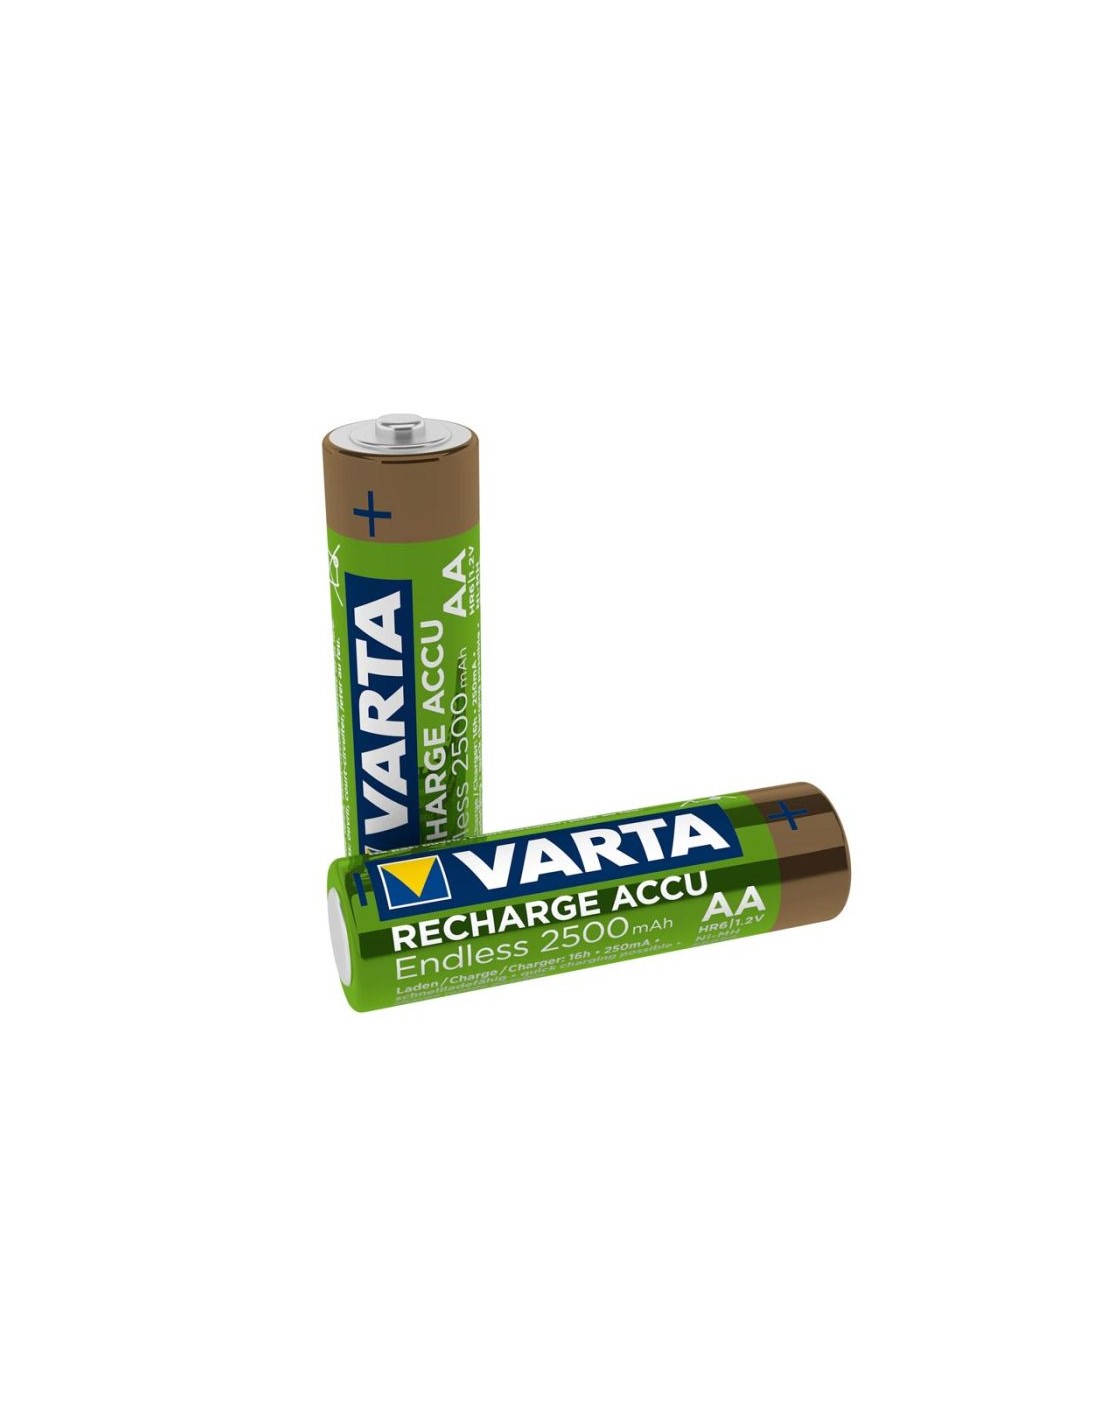 2 x pile rechargeable Endless Varta LR6 AA 1.2V Tunisie